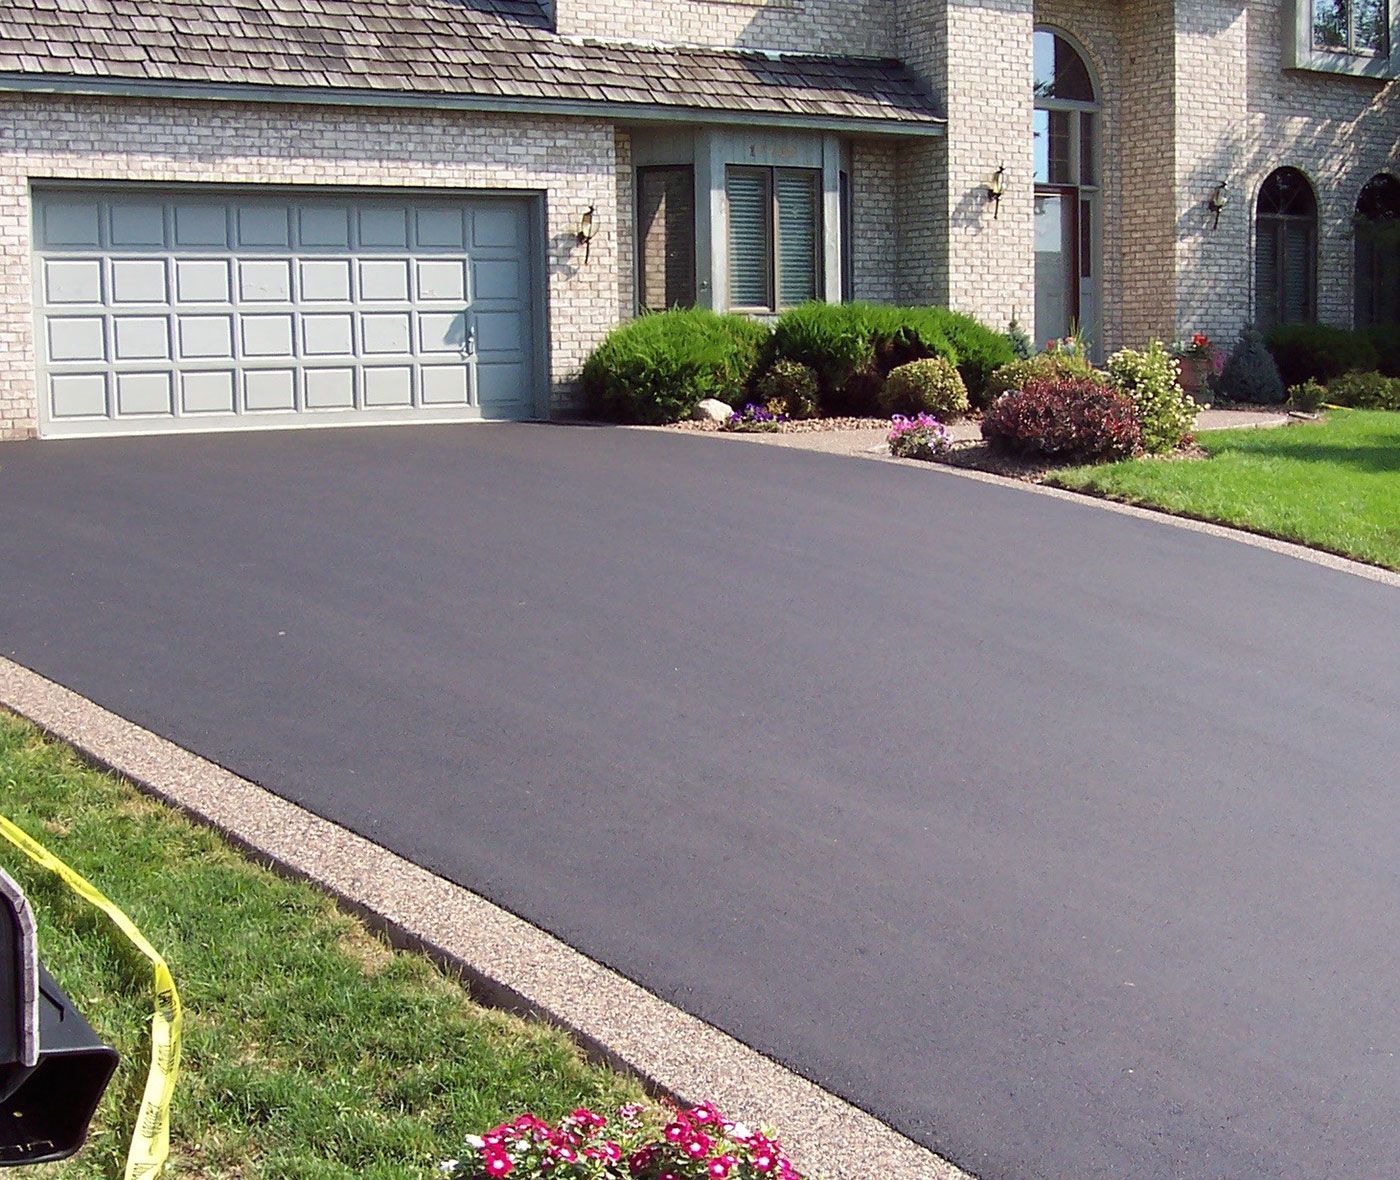 An asphalt driveway, neatly outlined with crisp edges and a smooth, dark surface.